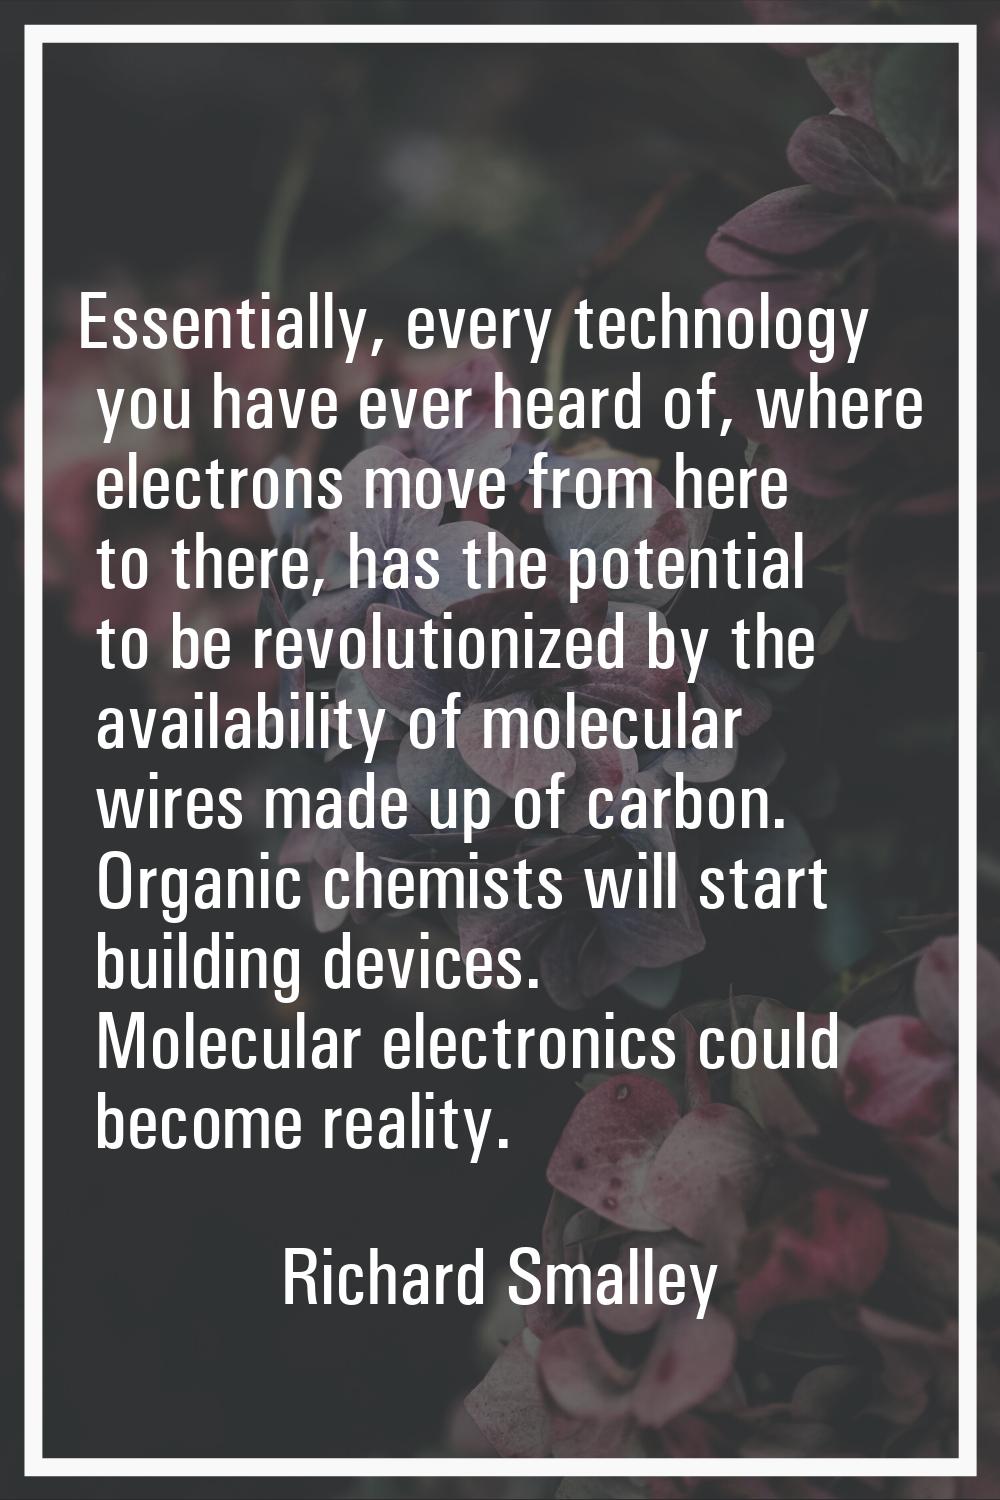 Essentially, every technology you have ever heard of, where electrons move from here to there, has 